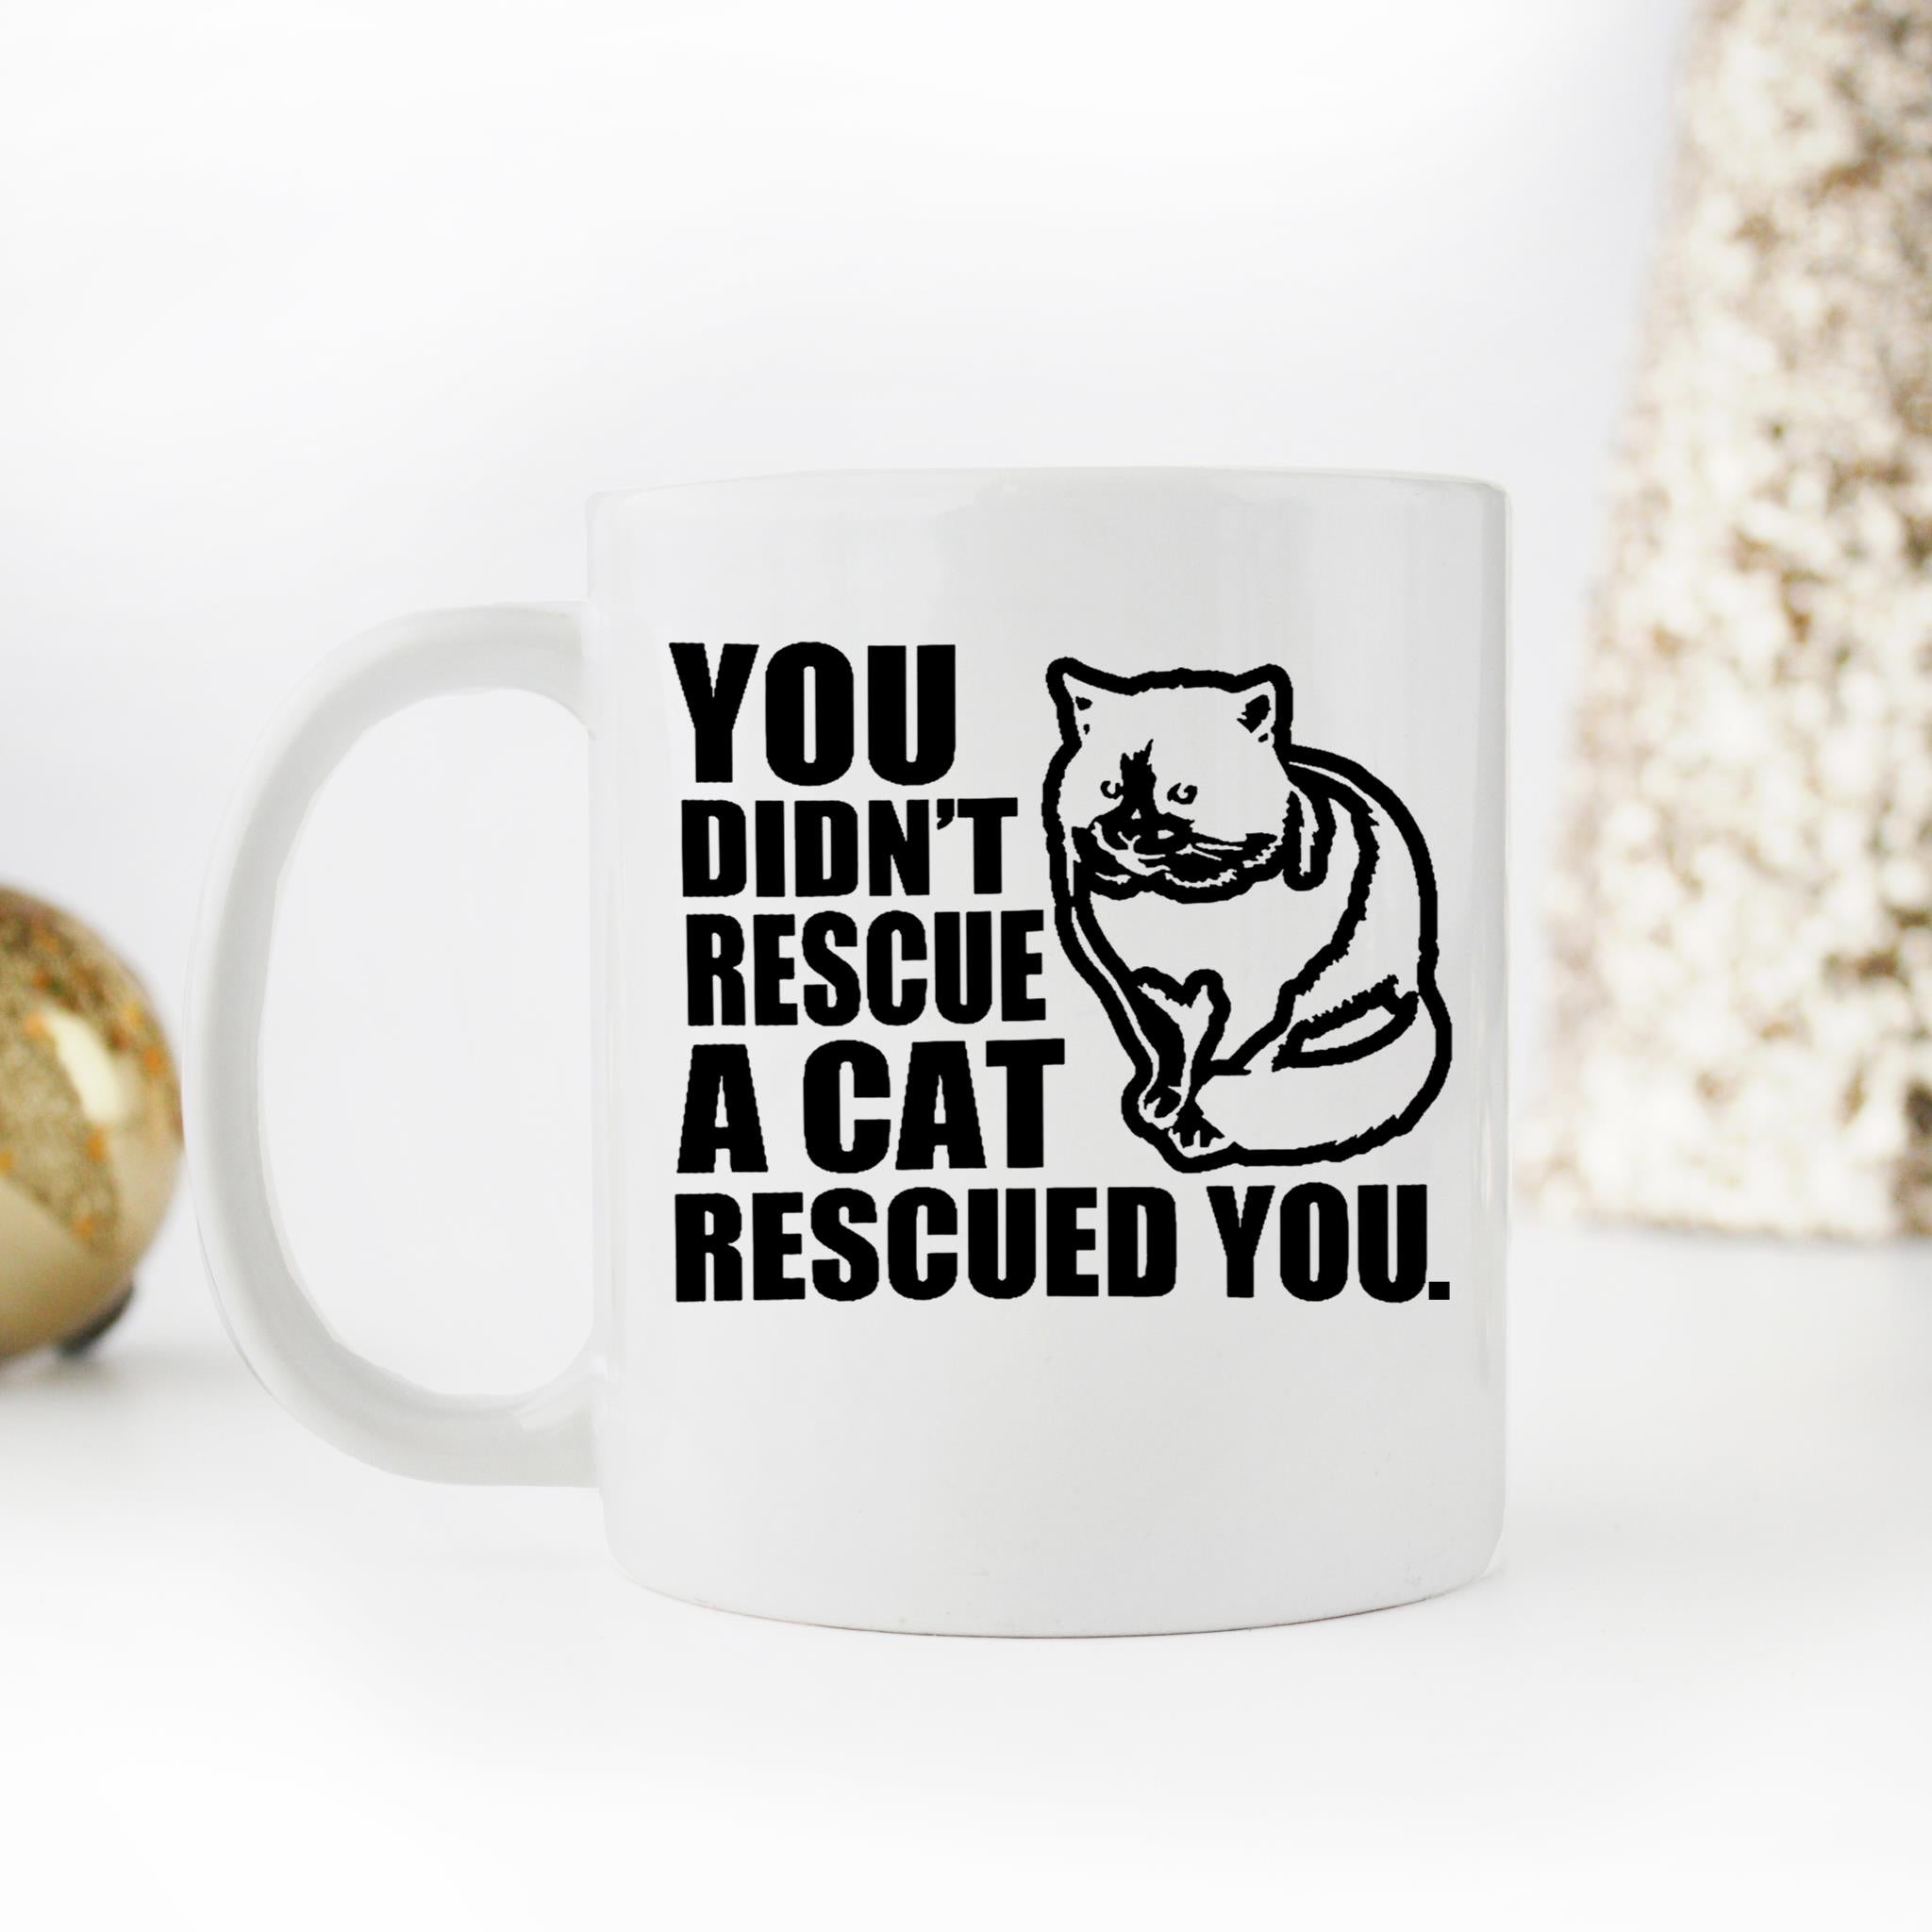 Skitongifts Funny Ceramic Novelty Coffee Mug Cat Lovers You Didnt Rescue A Cat Rescued You qQpSvDM